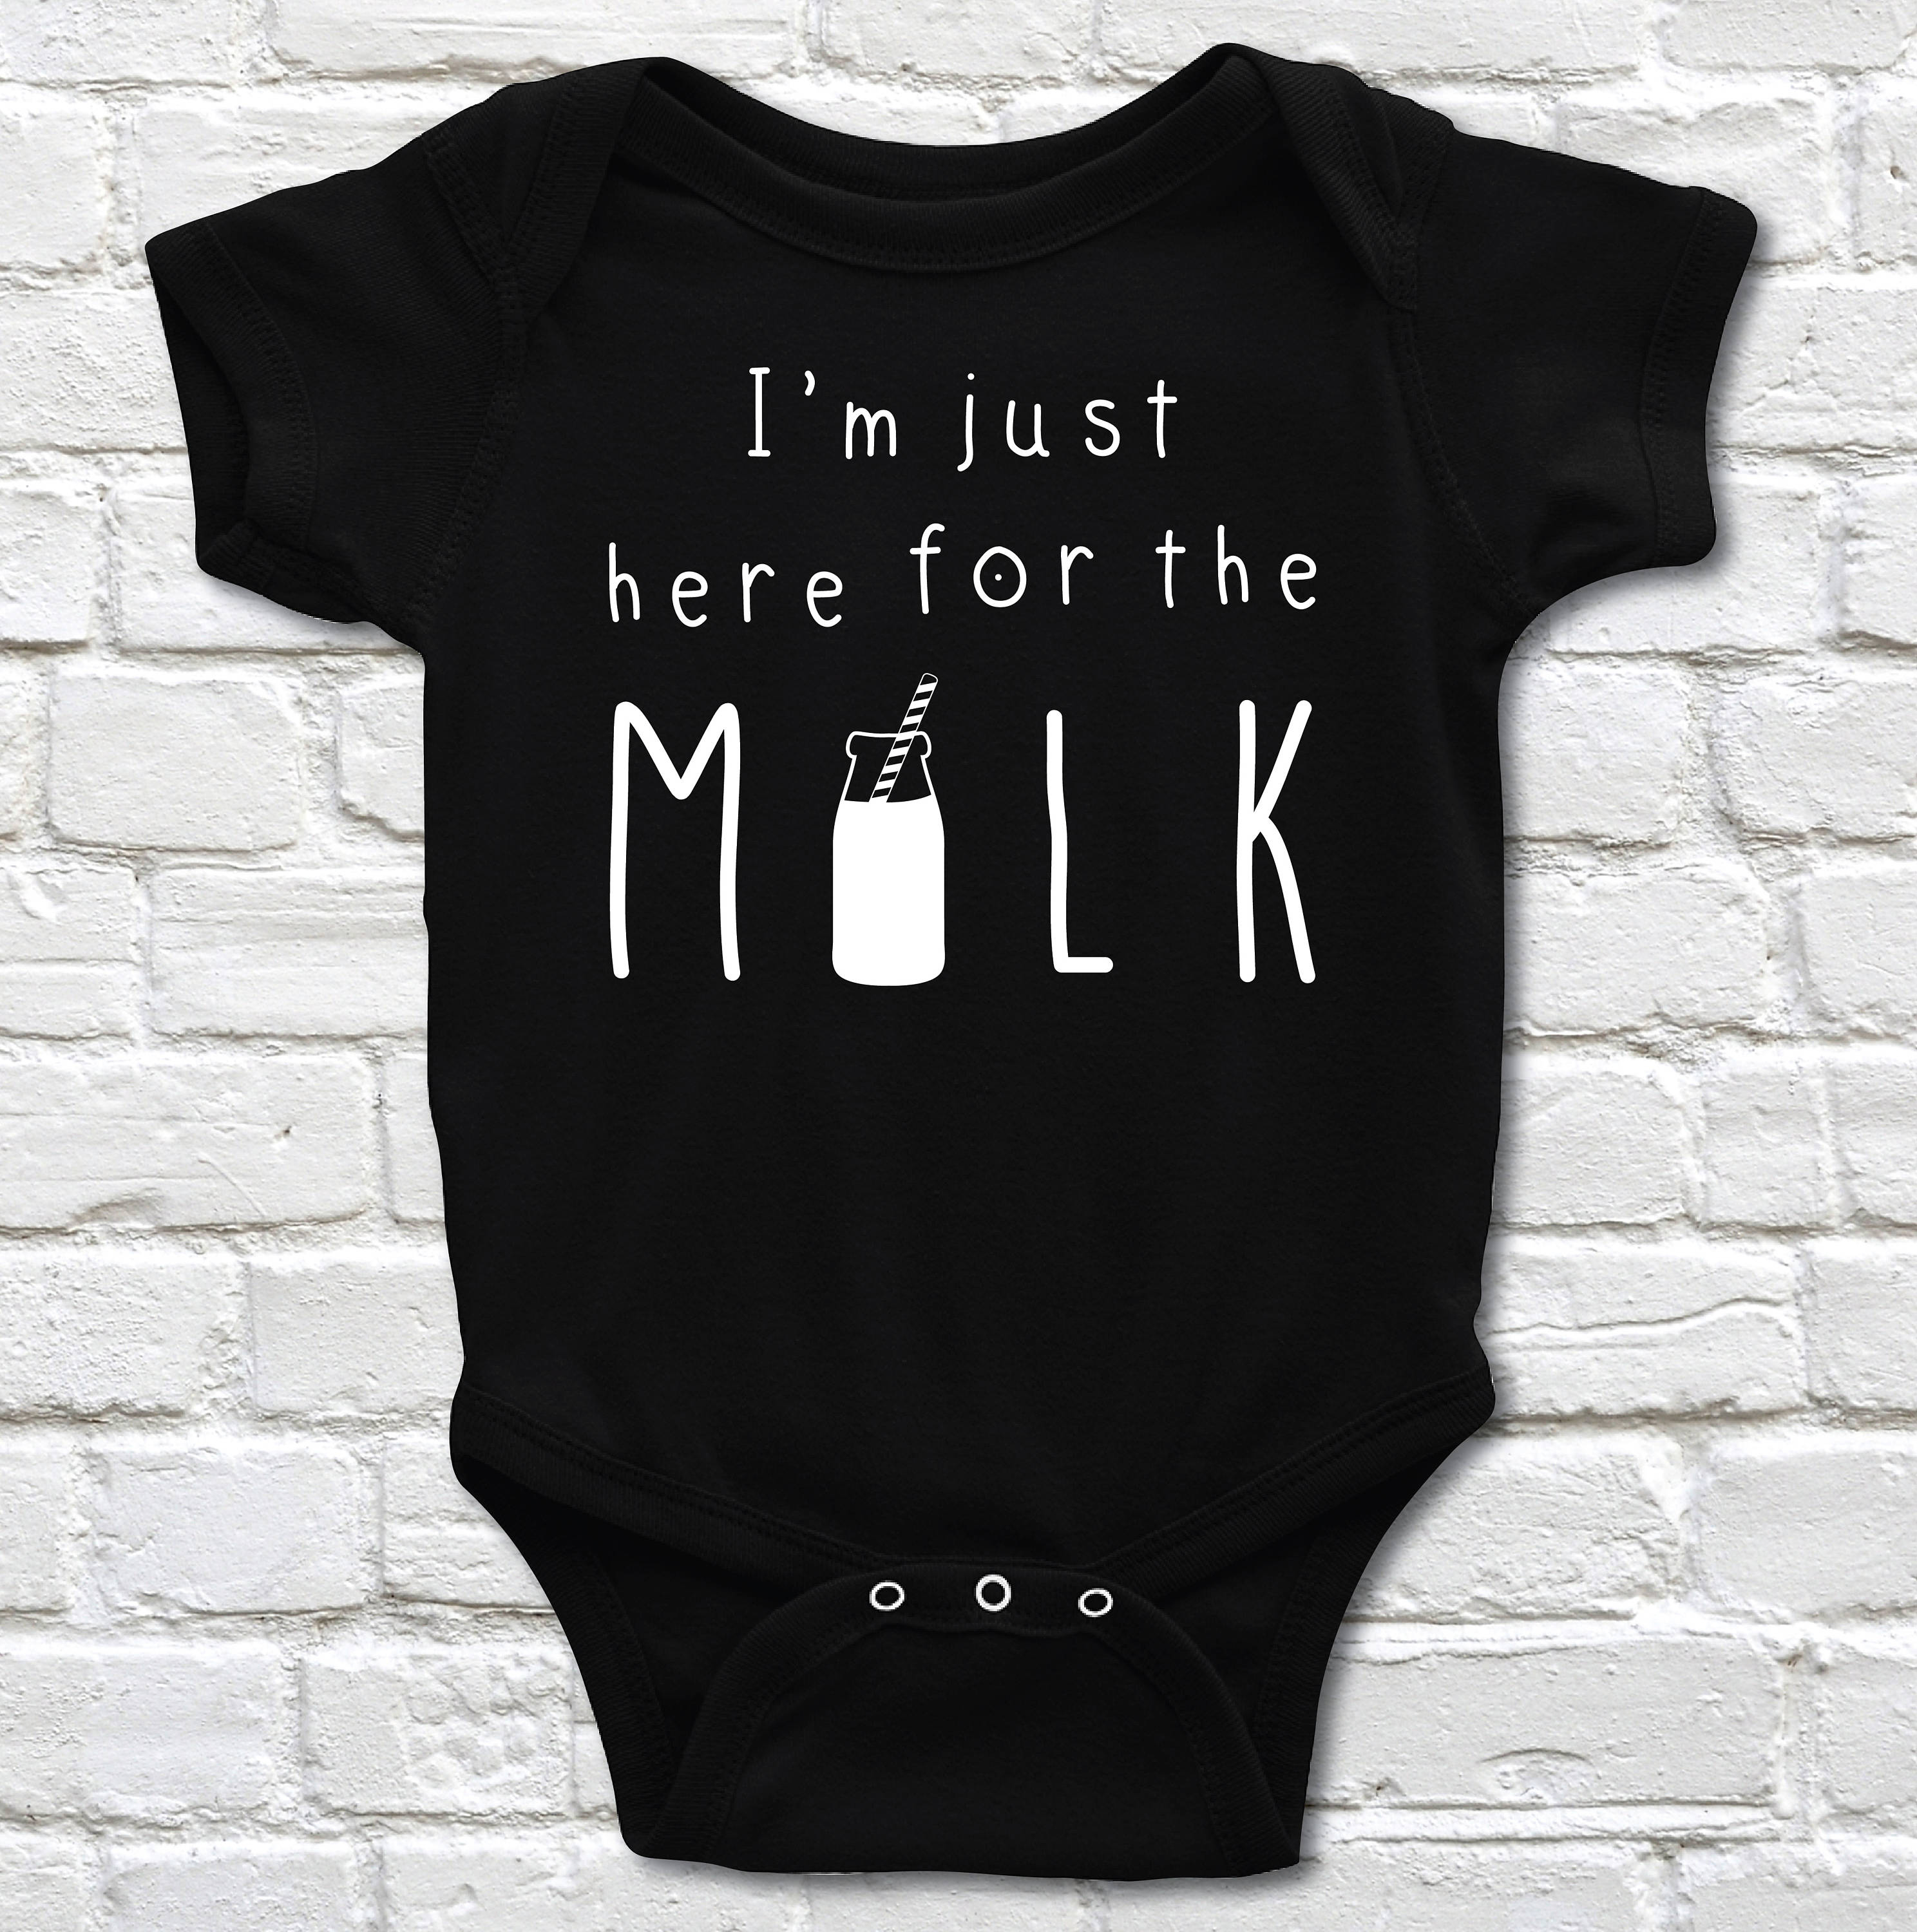 Download Gender Neutral Cute Baby Clothes Funny Black Bodysuit | Etsy